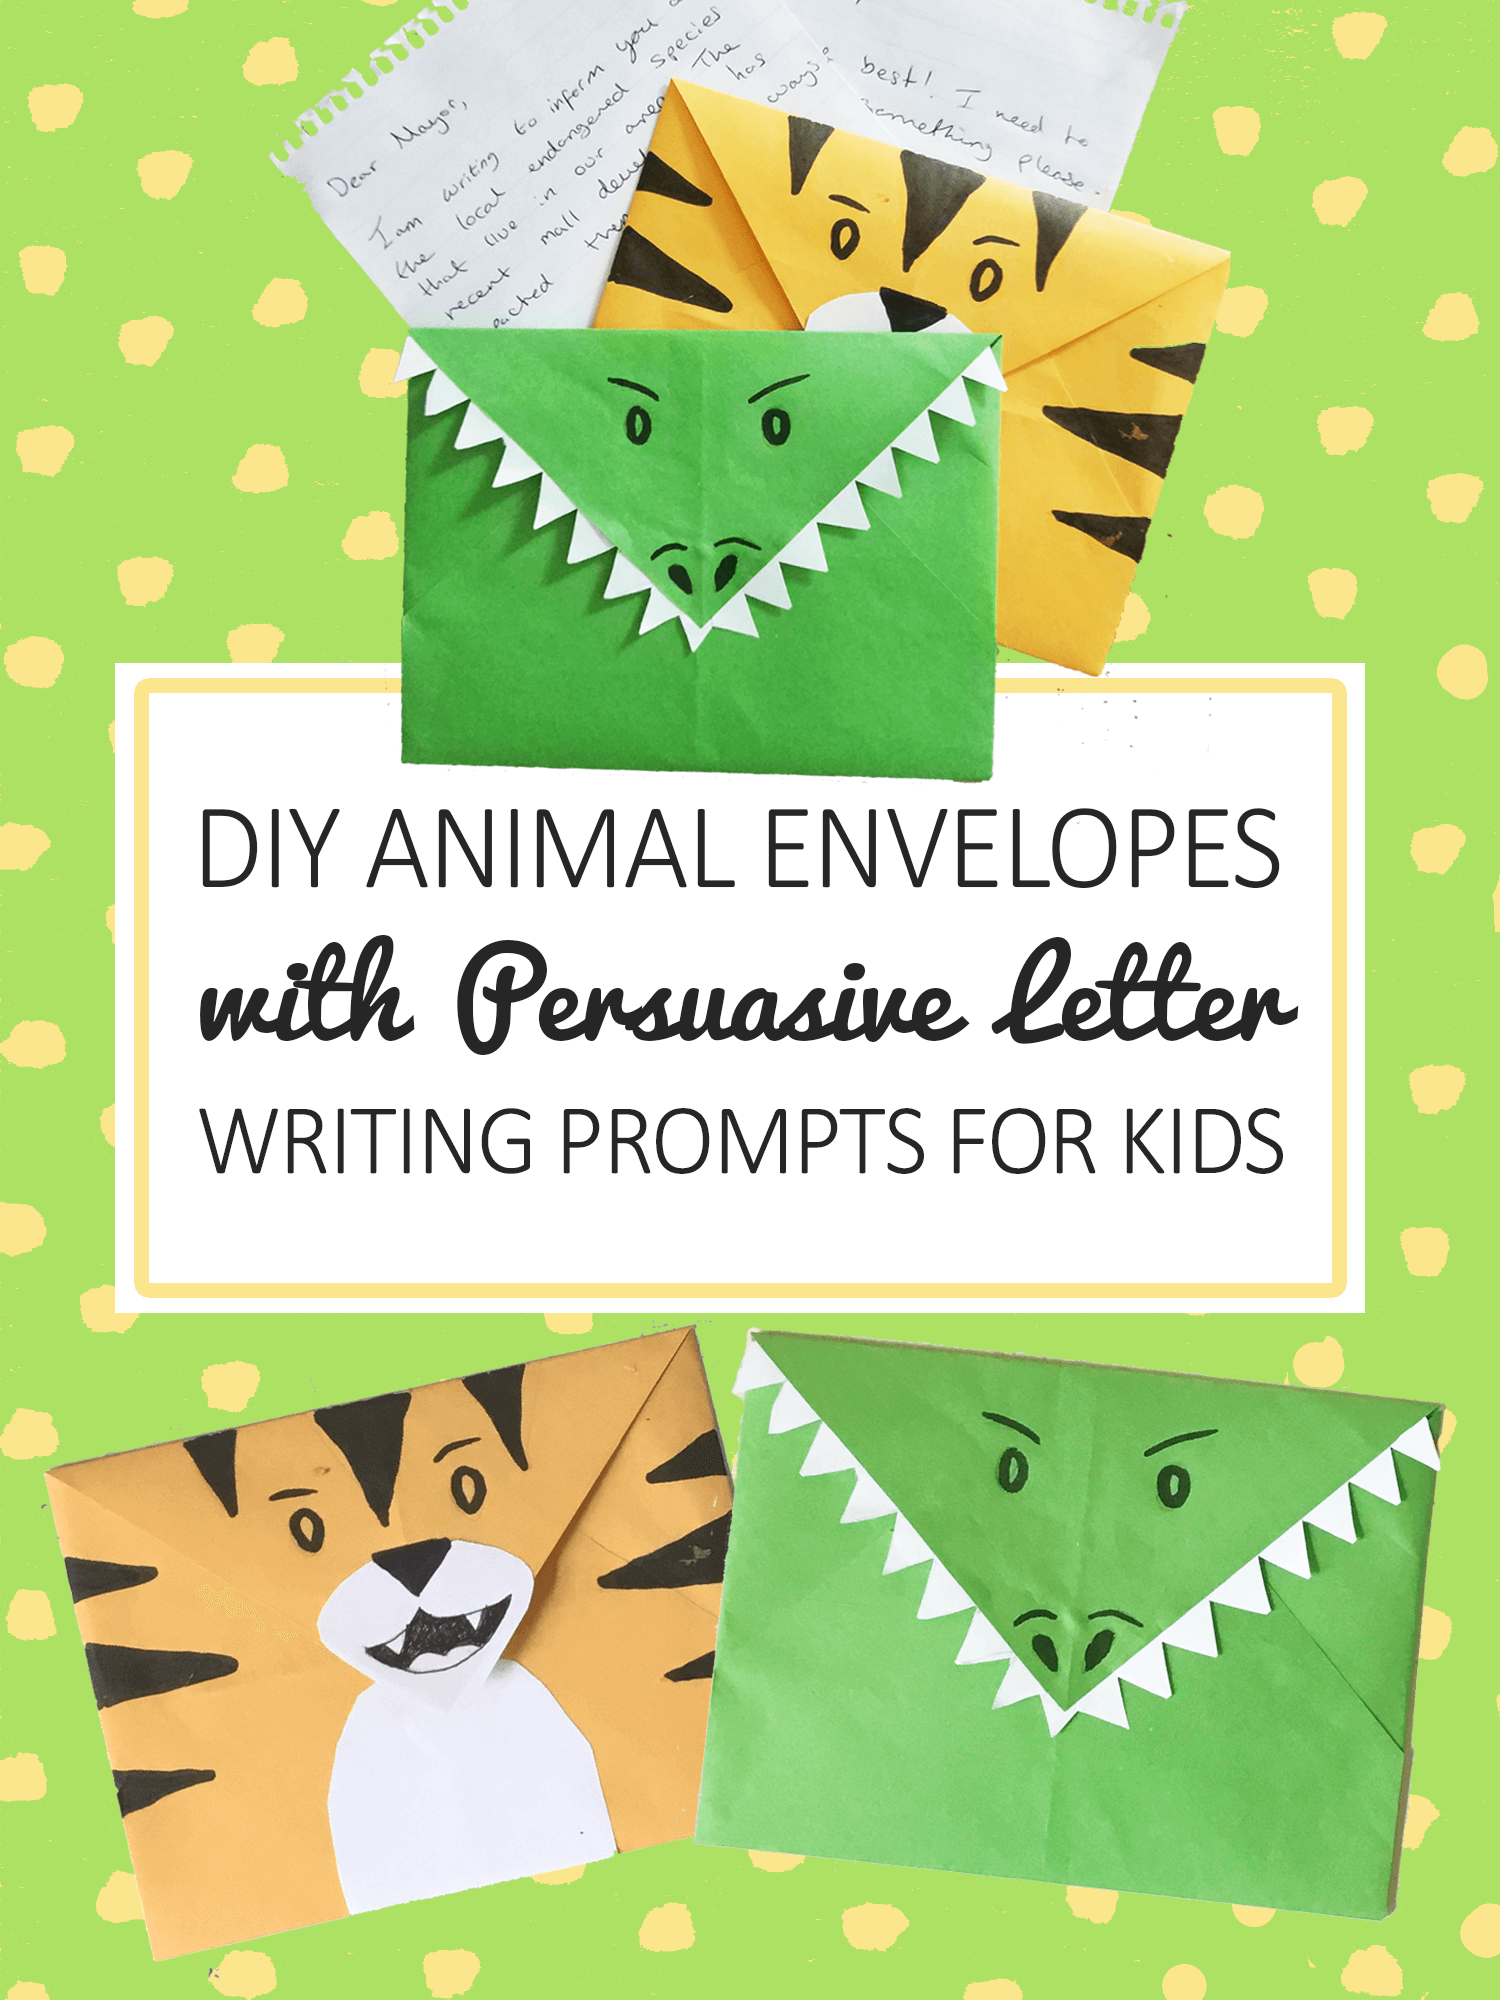 DIY Animal Envelopes tutorial with persuasive letter writing prompts for kids